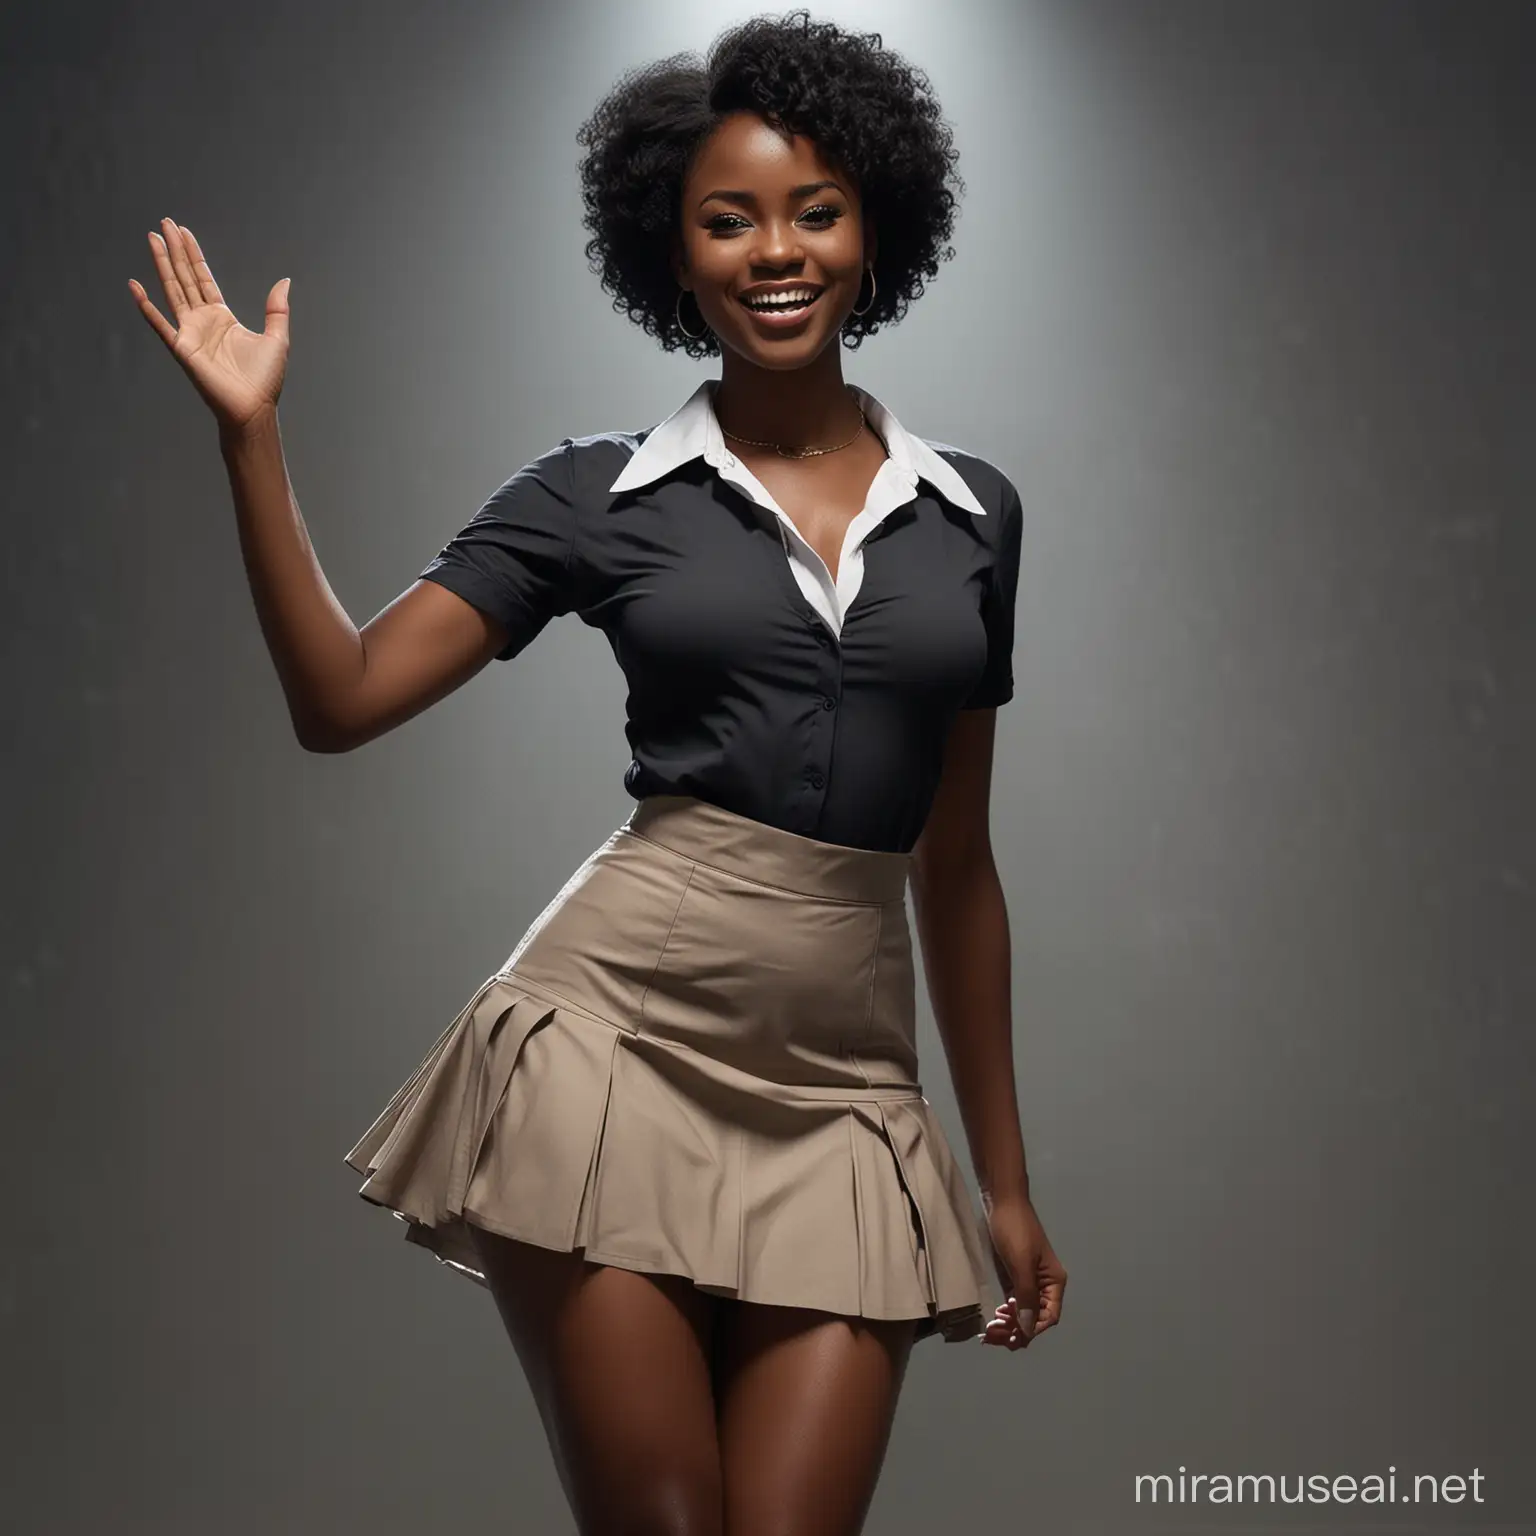 Seductive African Woman in Short Skirt with Collar and Playful Expression